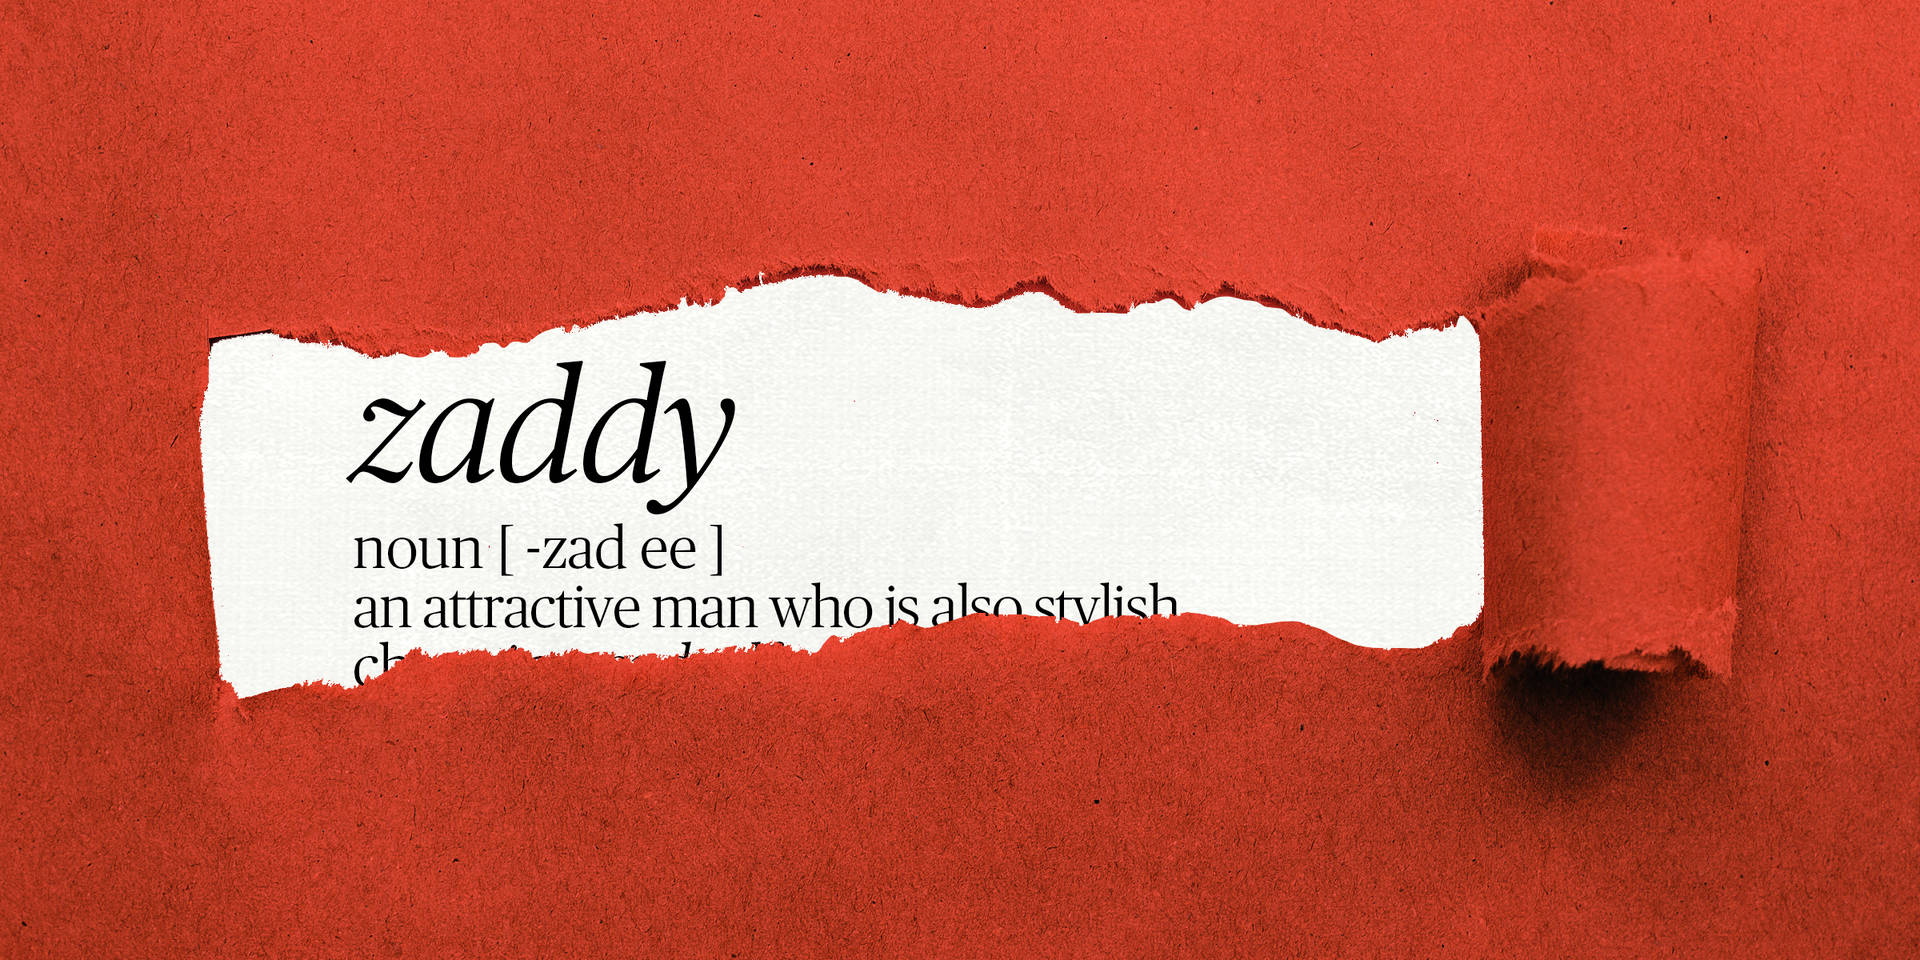 Dictionary Meaning Of Zaddy